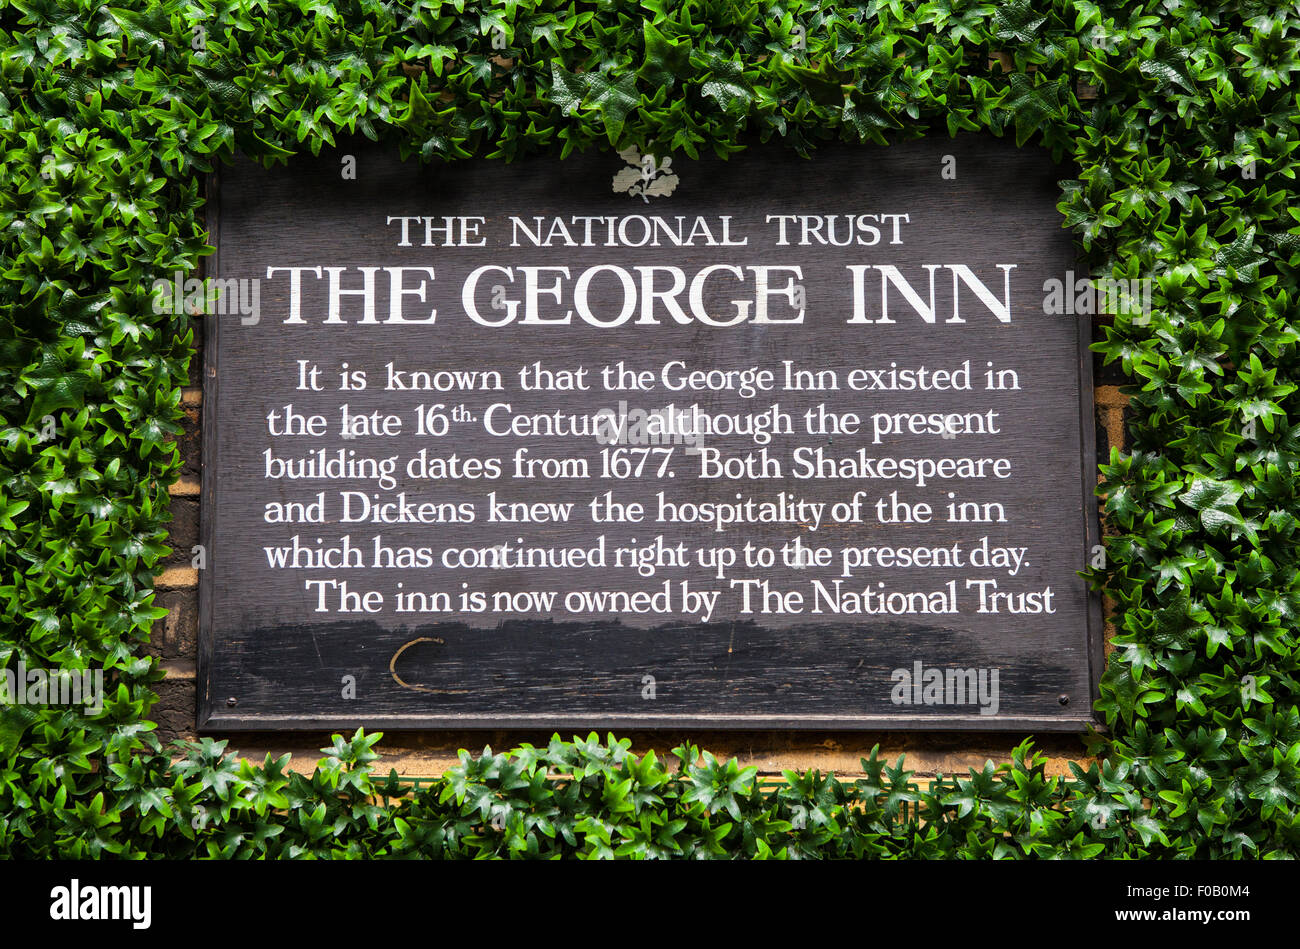 LONDON, UK - AUGUST 7TH 2015: An information board at the historic George Inn Public House in Southwark, London on 7th August 20 Stock Photo